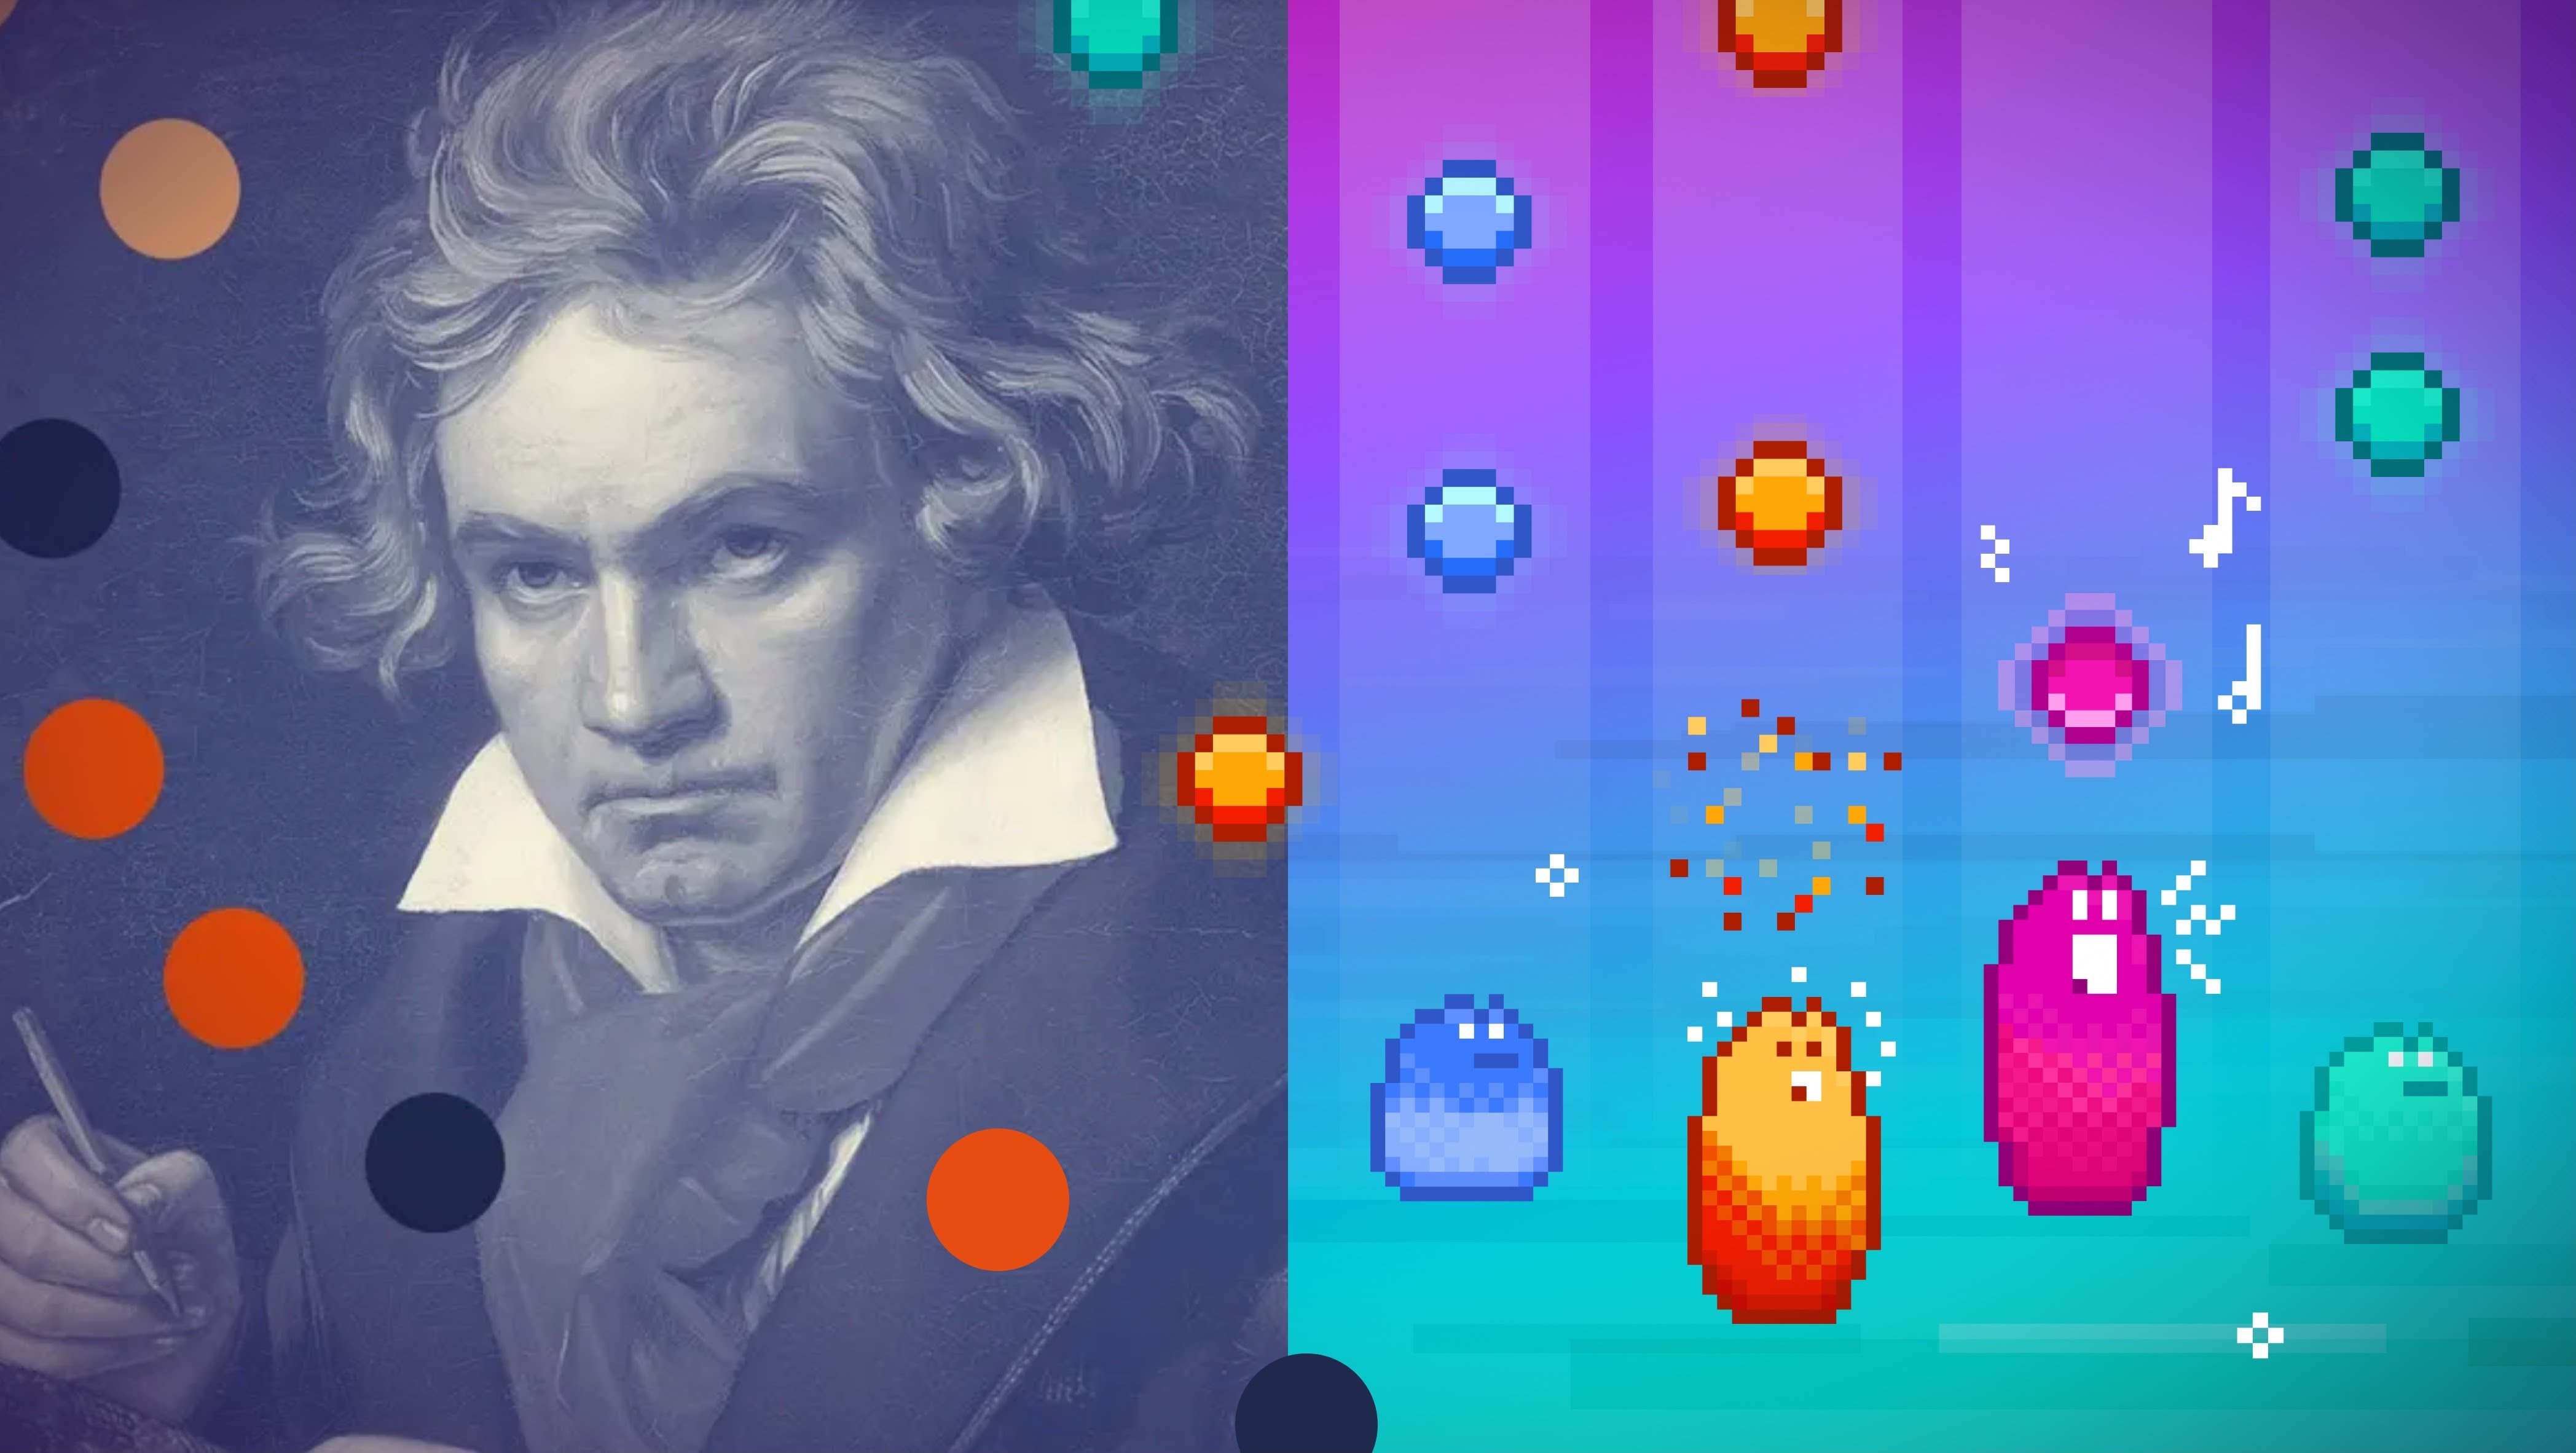 Undertrykkelse prioritet Seaside The Blobs are back and teaming up with Beethoven